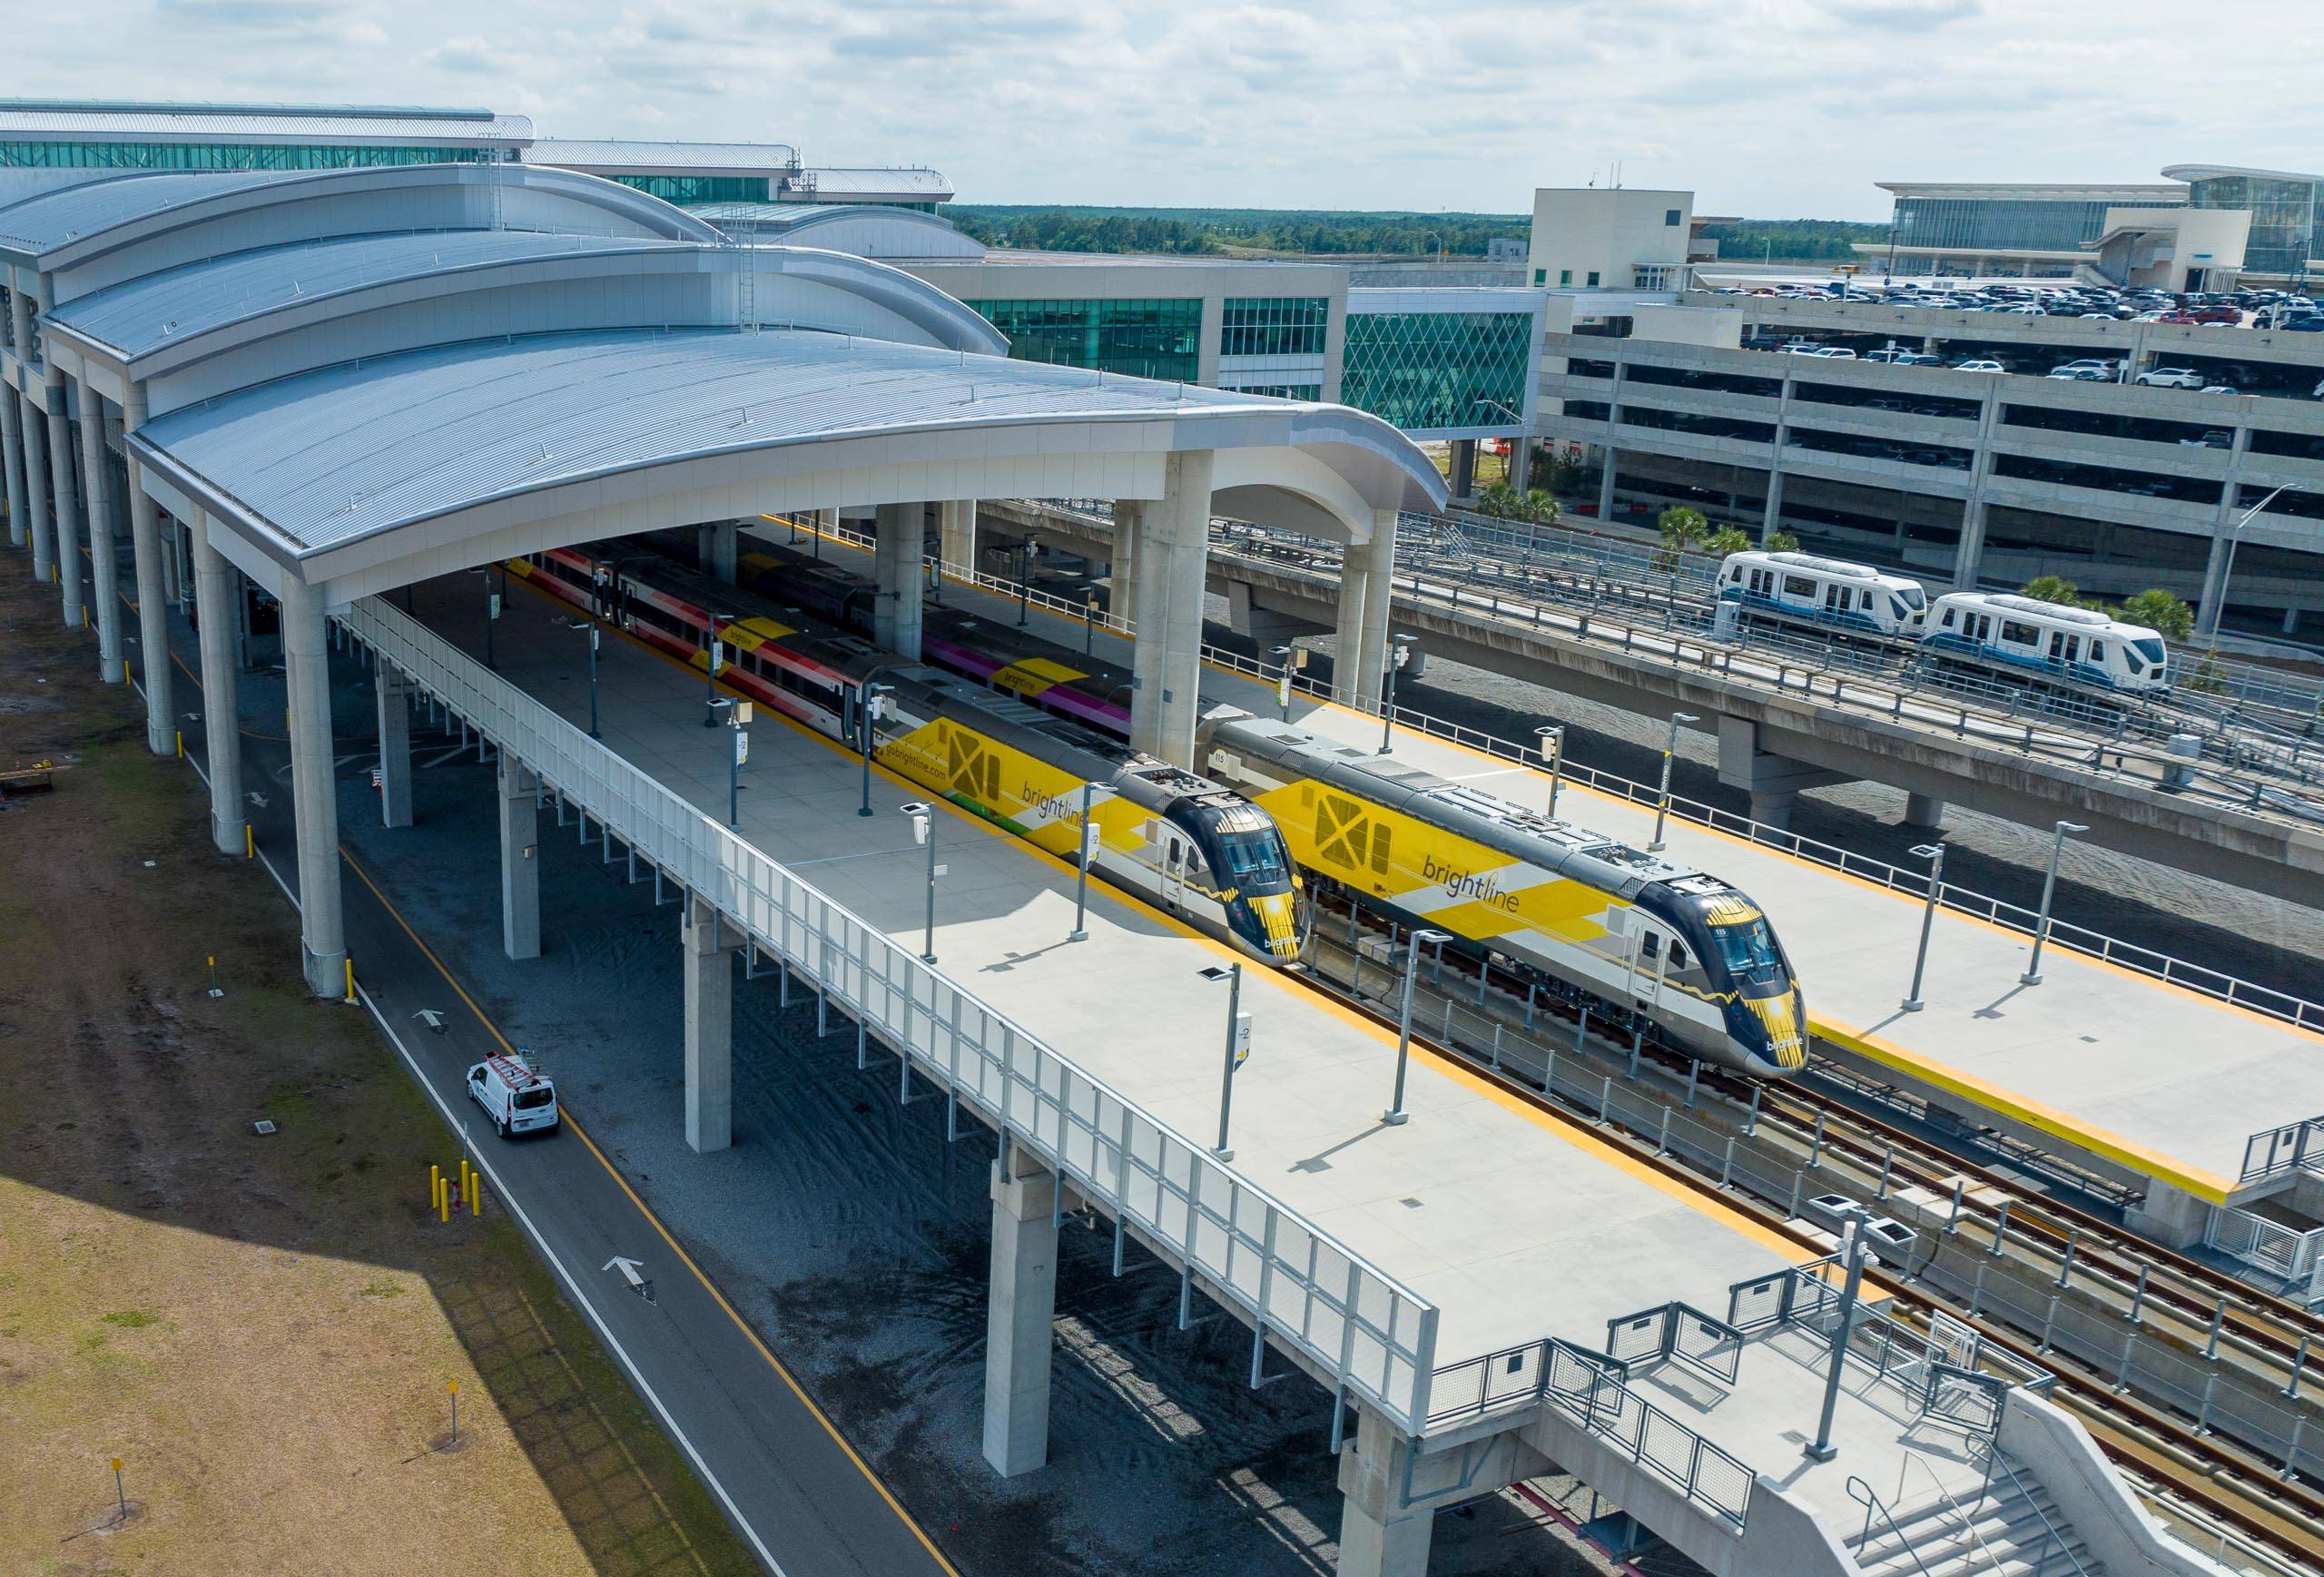 Brightline launches intercity rail service to Orlando International Airport on September 22